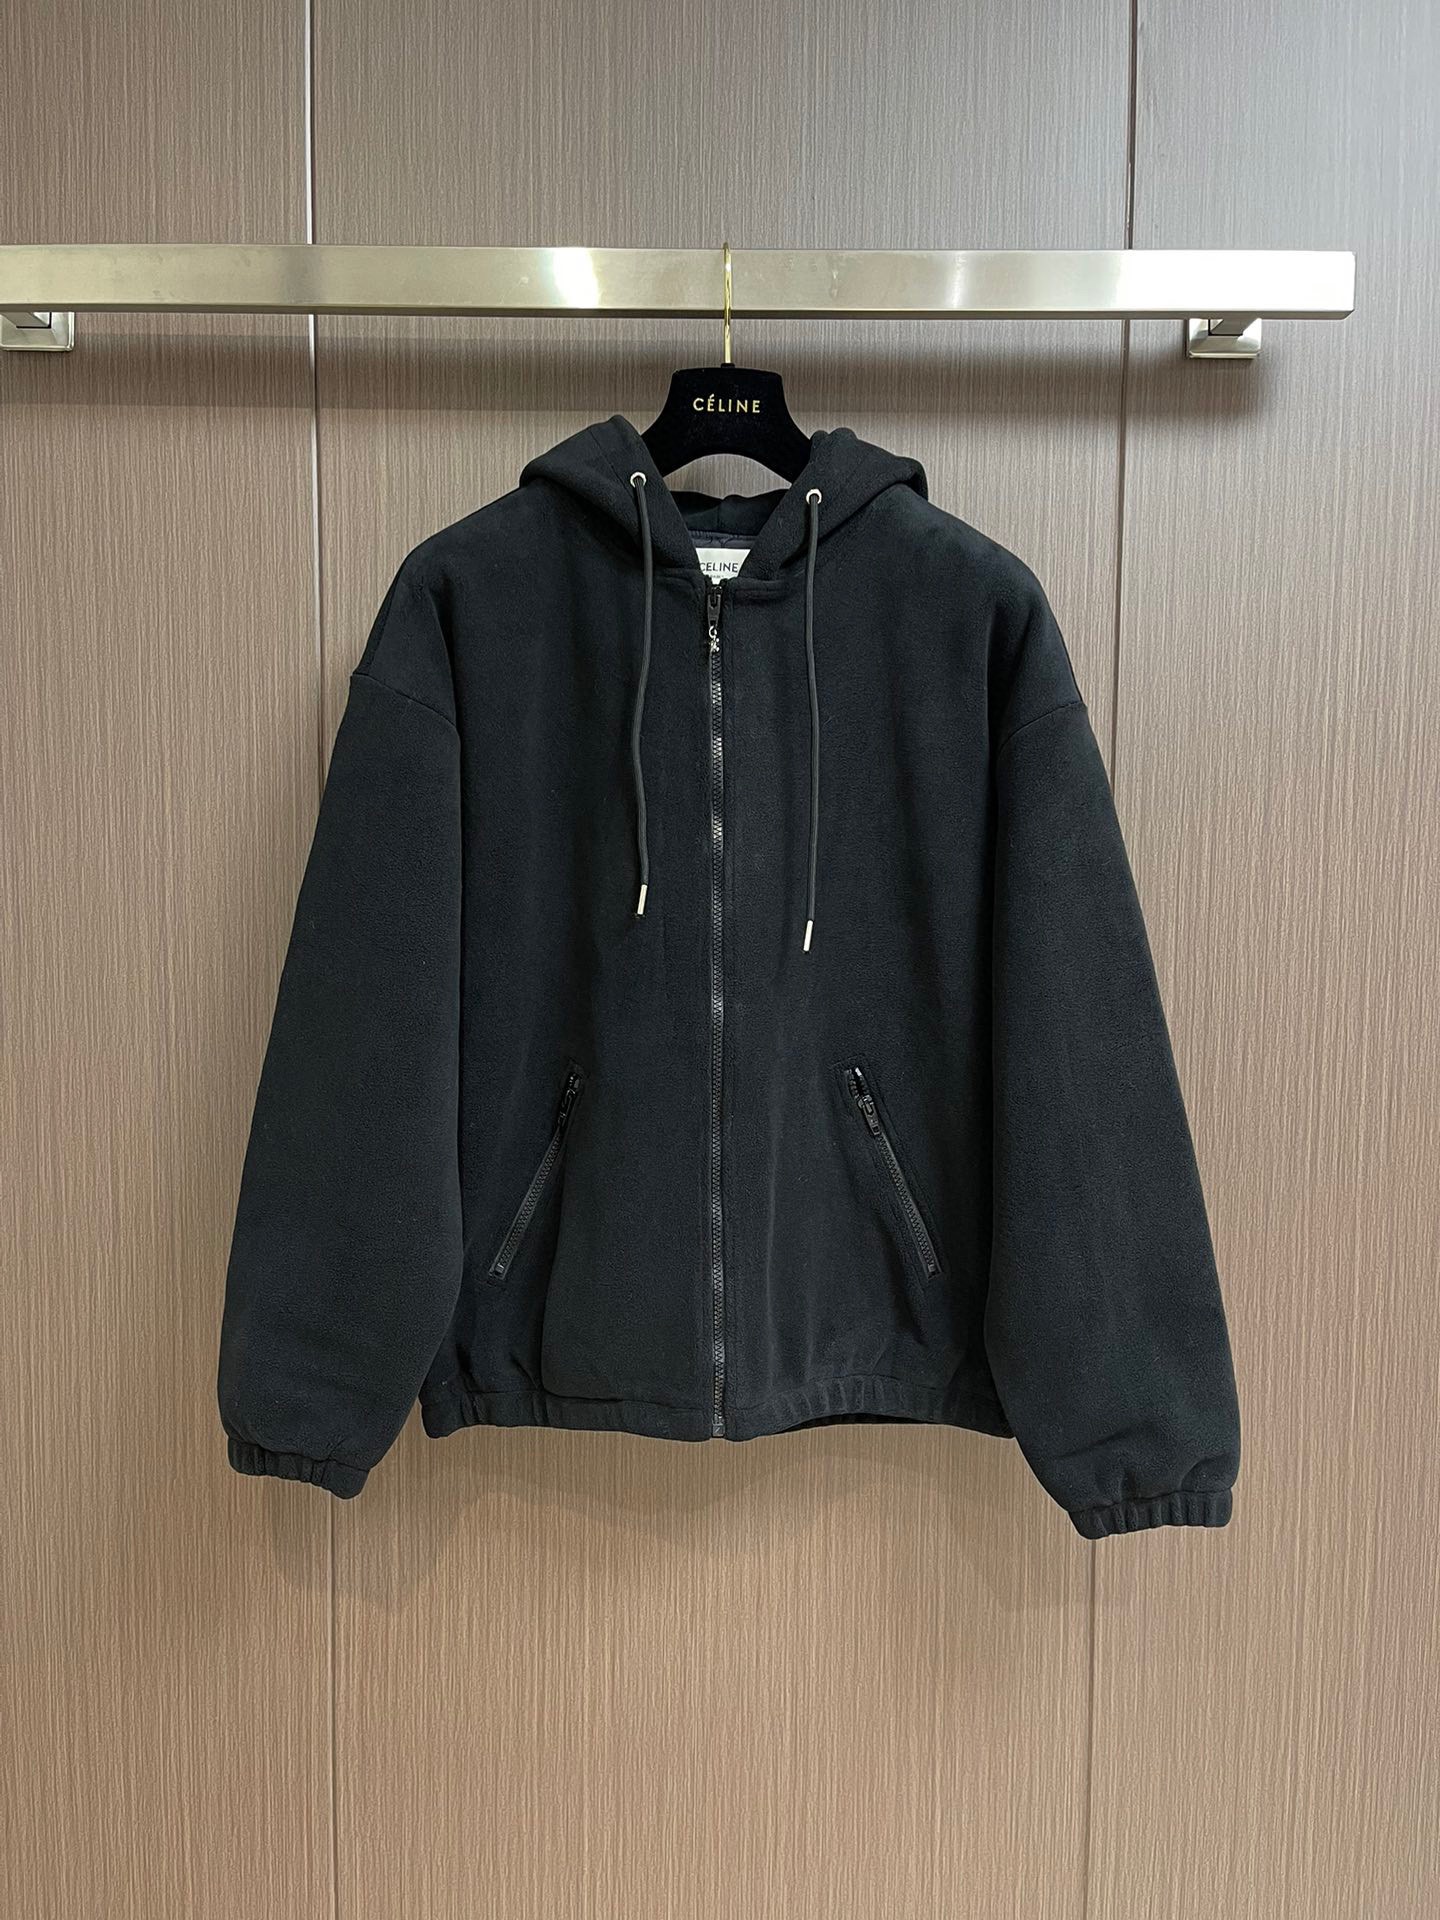 Celine Top
 Clothing Coats & Jackets Hooded Top